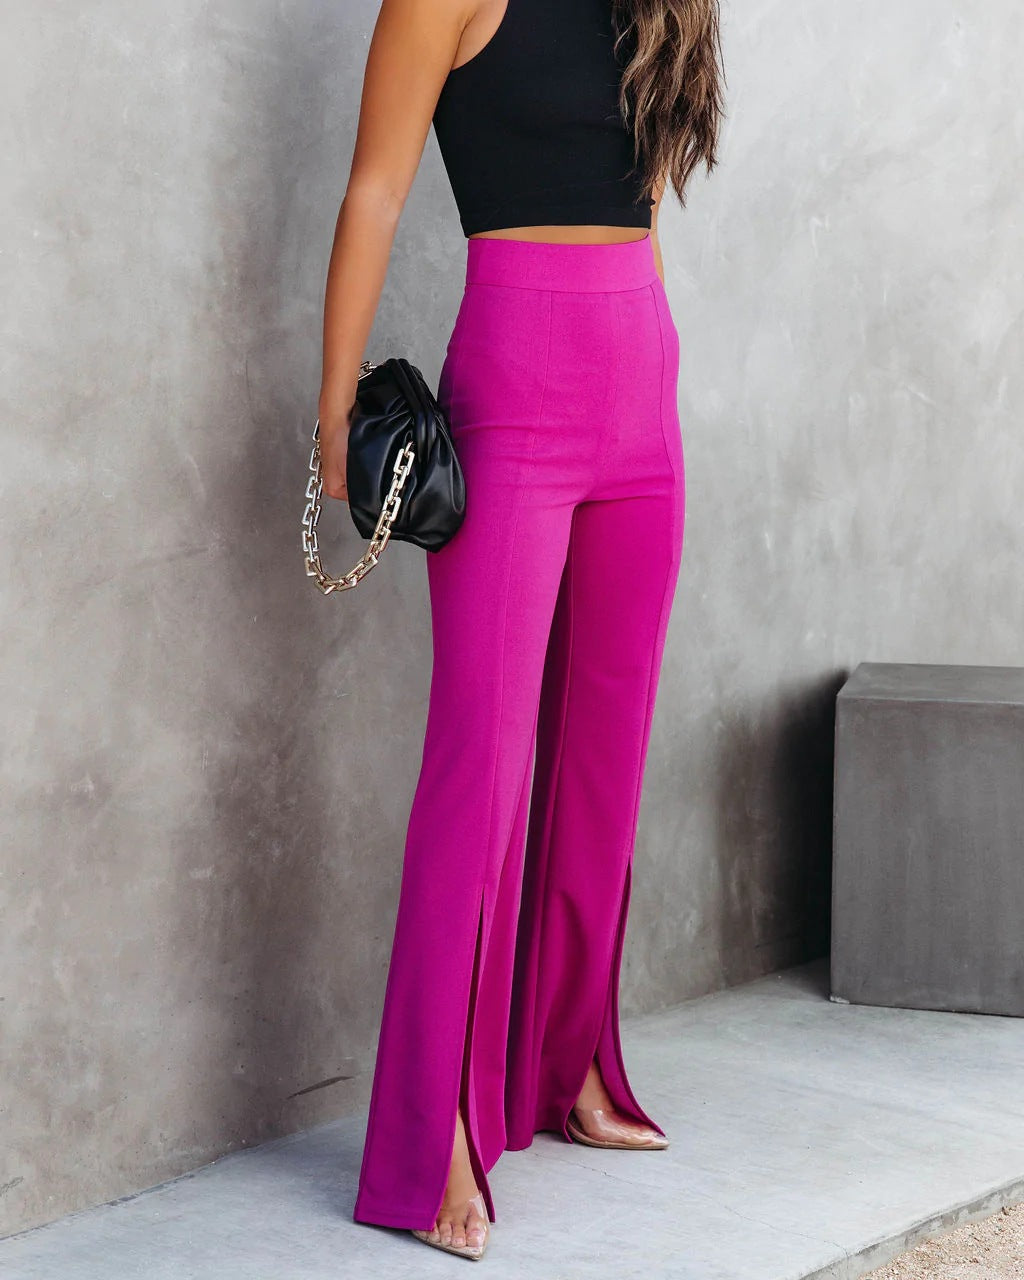 Hot Pink Pants Outfit  High Waist Hot Pink Aesthetic Slit Pants – TGC  FASHION